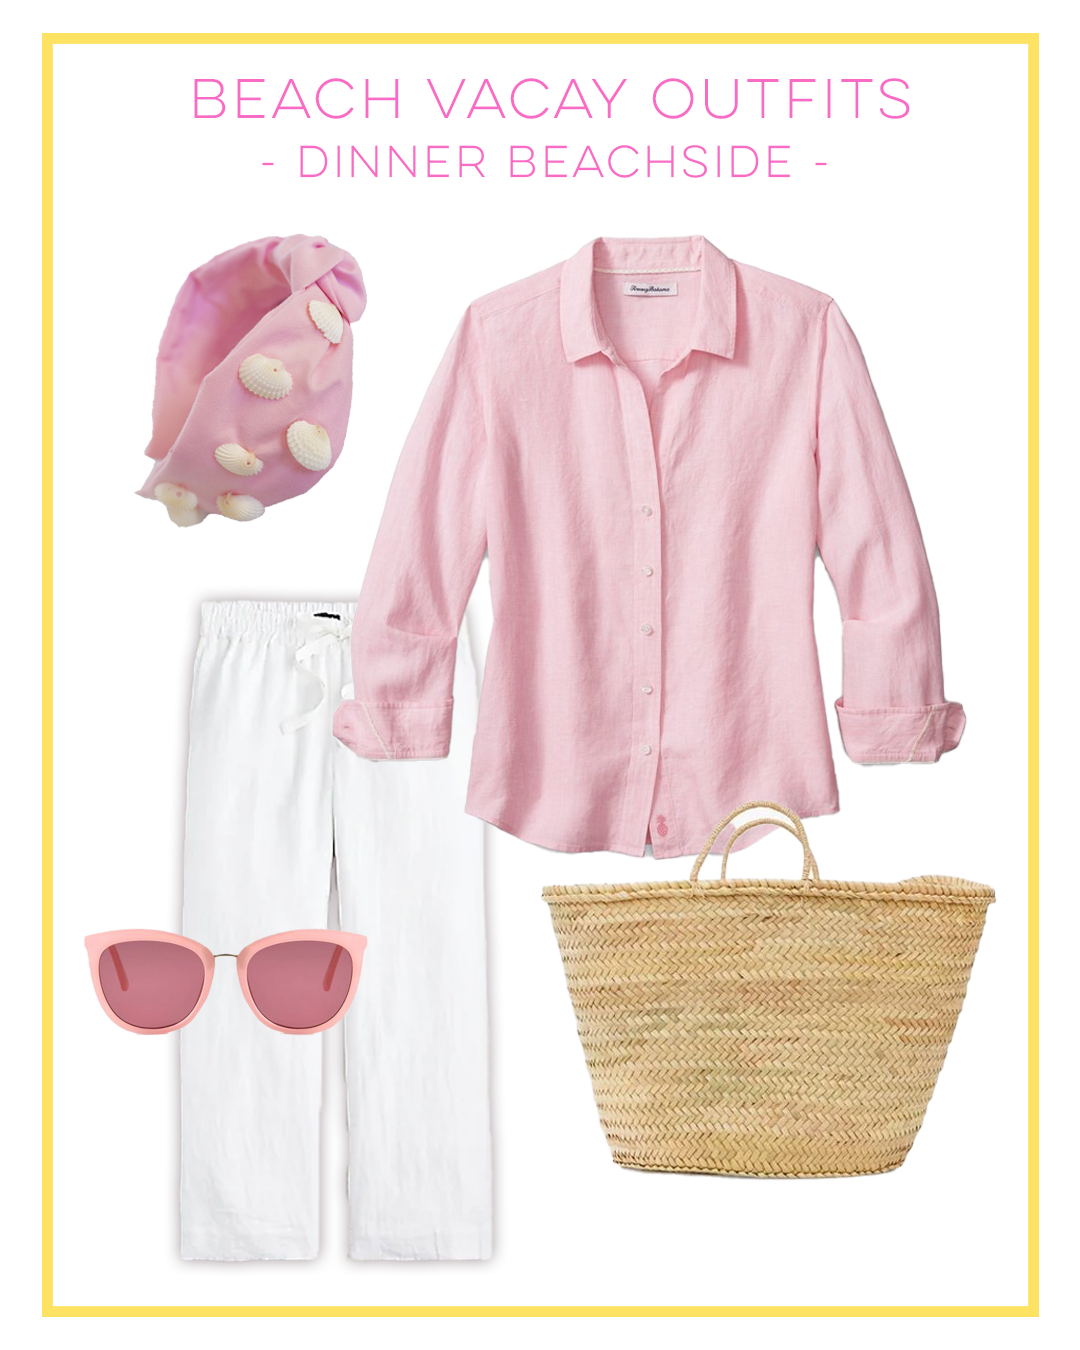 Beach Getaway Outfit Ideas on white and pink